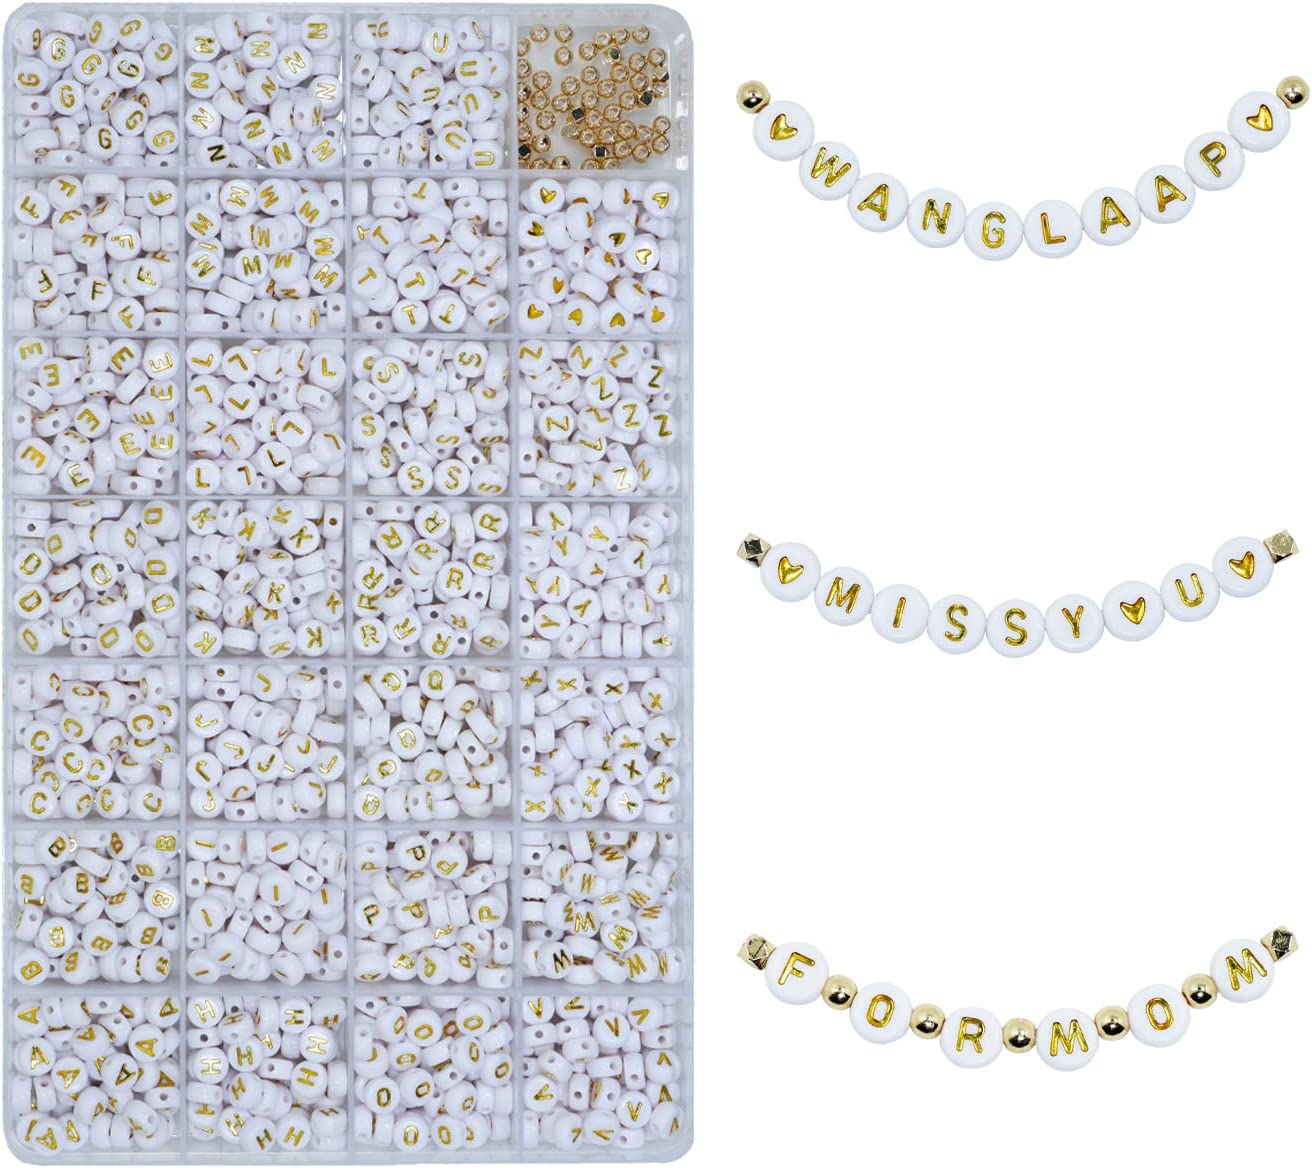 1200pcs, 4mm X 7mm Abs Resin Small Letter Beads, Round Alphabet Beads,  Colorful Acrylic With Gold Letters, For Jewelry Making (colorful Beads With  Gold Letters),comes With Clear Elastic Cord